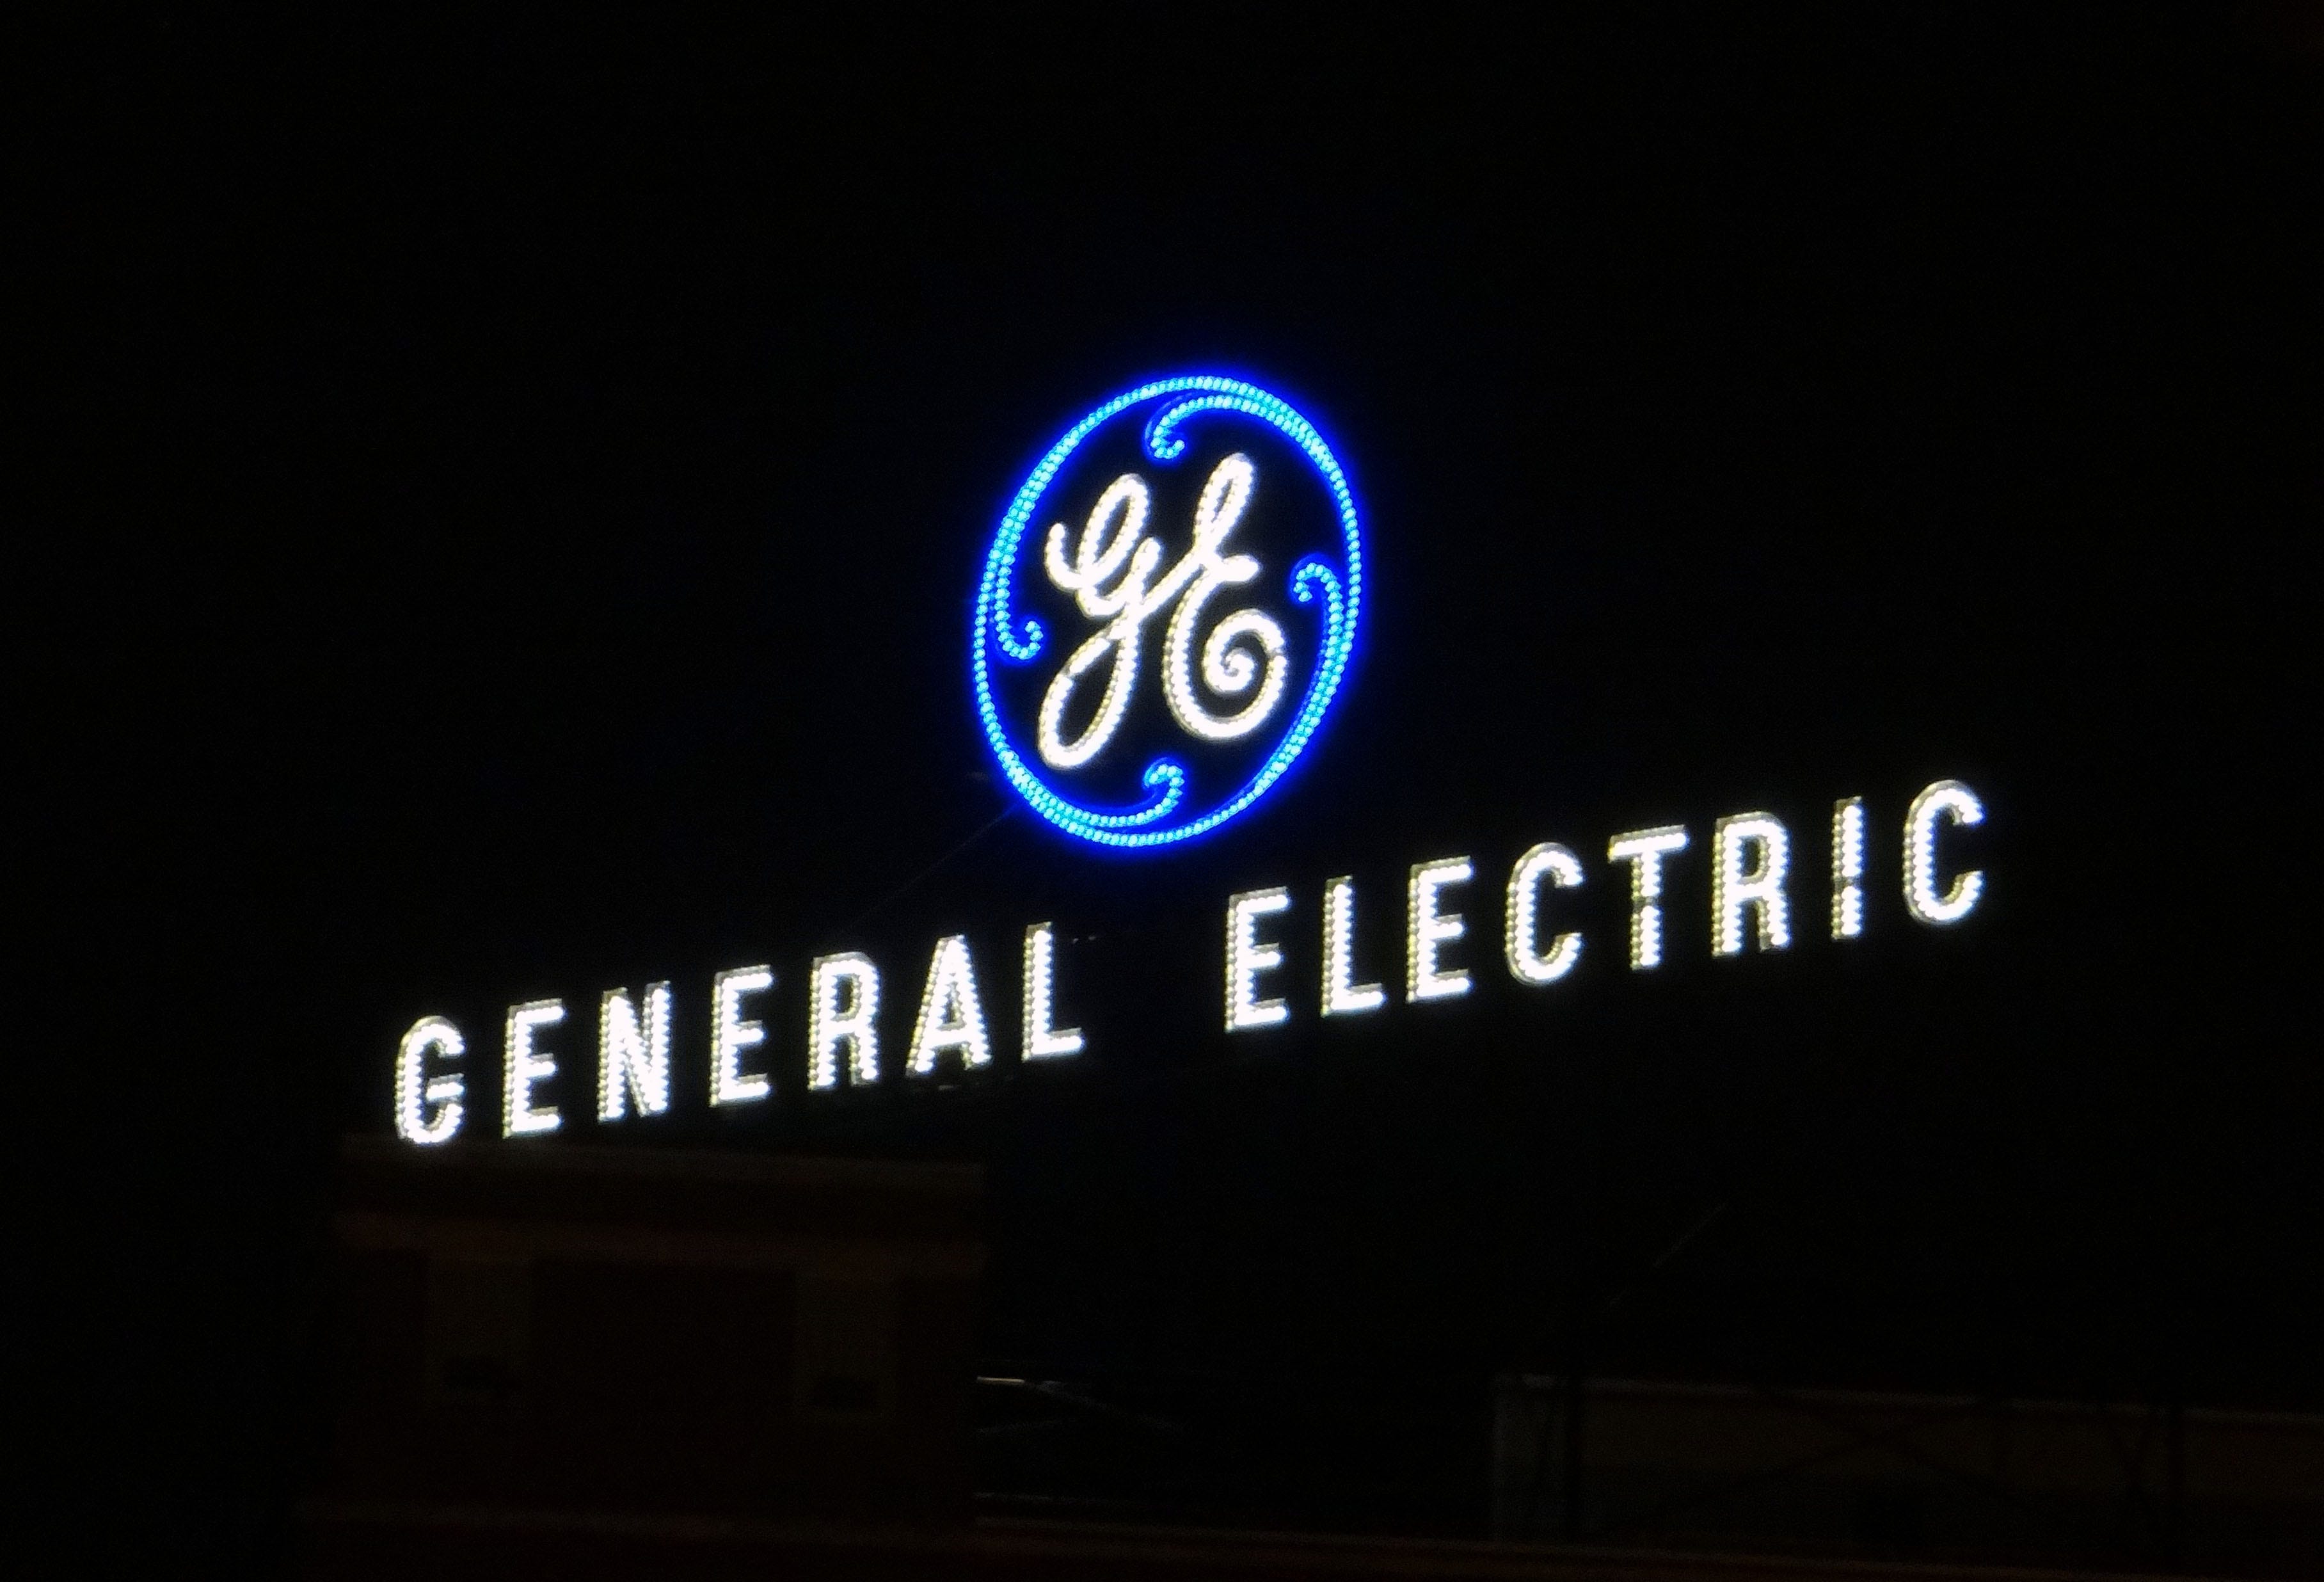 General Electric Shares Soar On Q2 Beat With Aerospace Segment As Key Driver